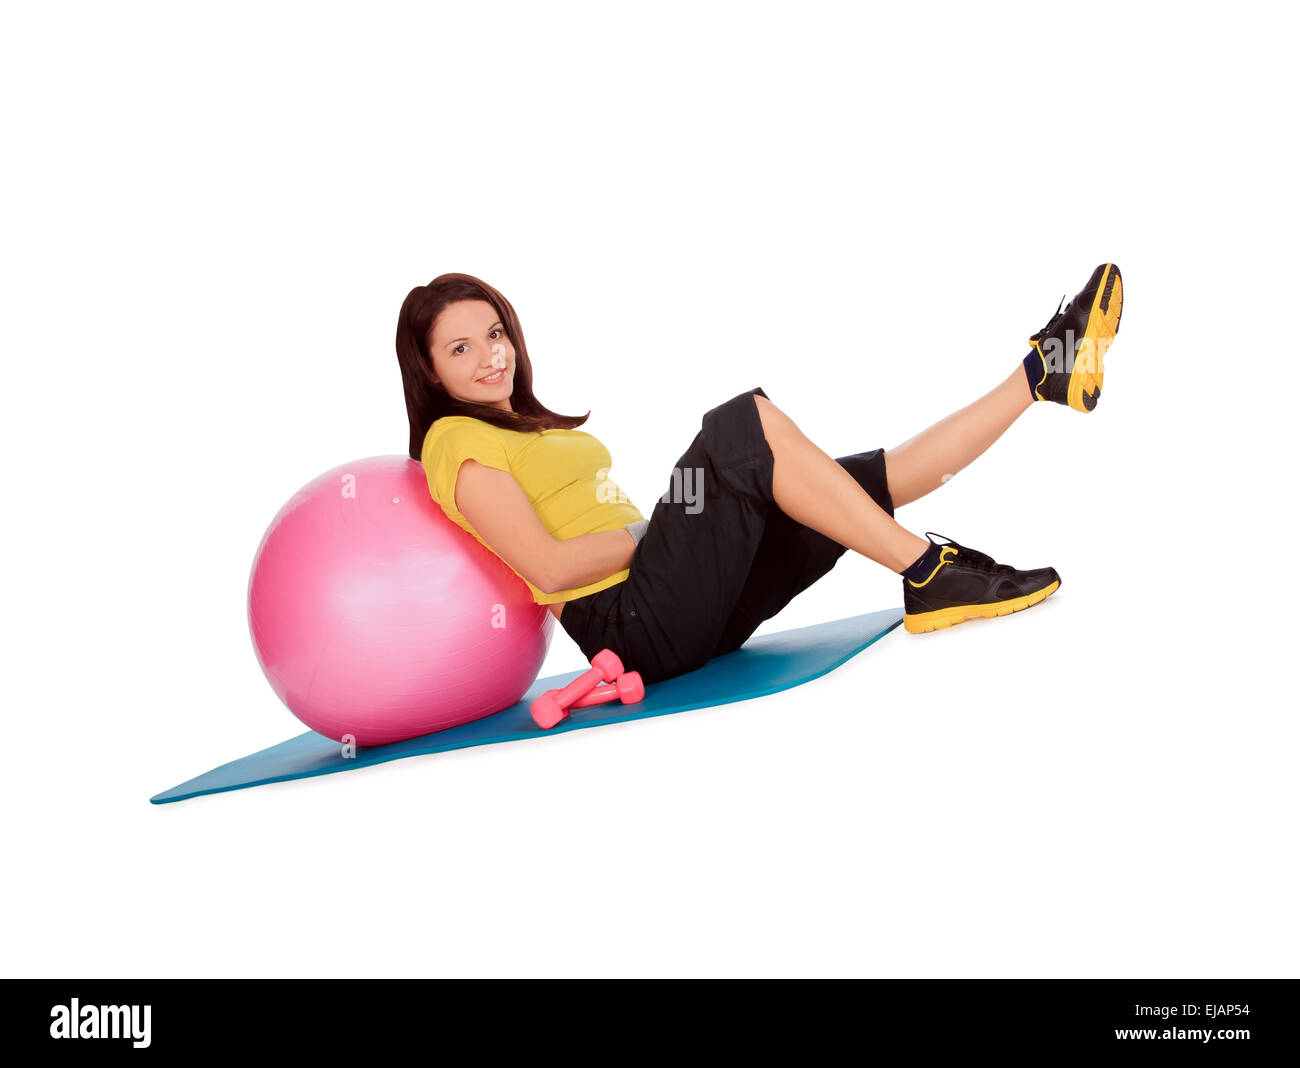 girl engaged on the ball in the gym Stock Photo